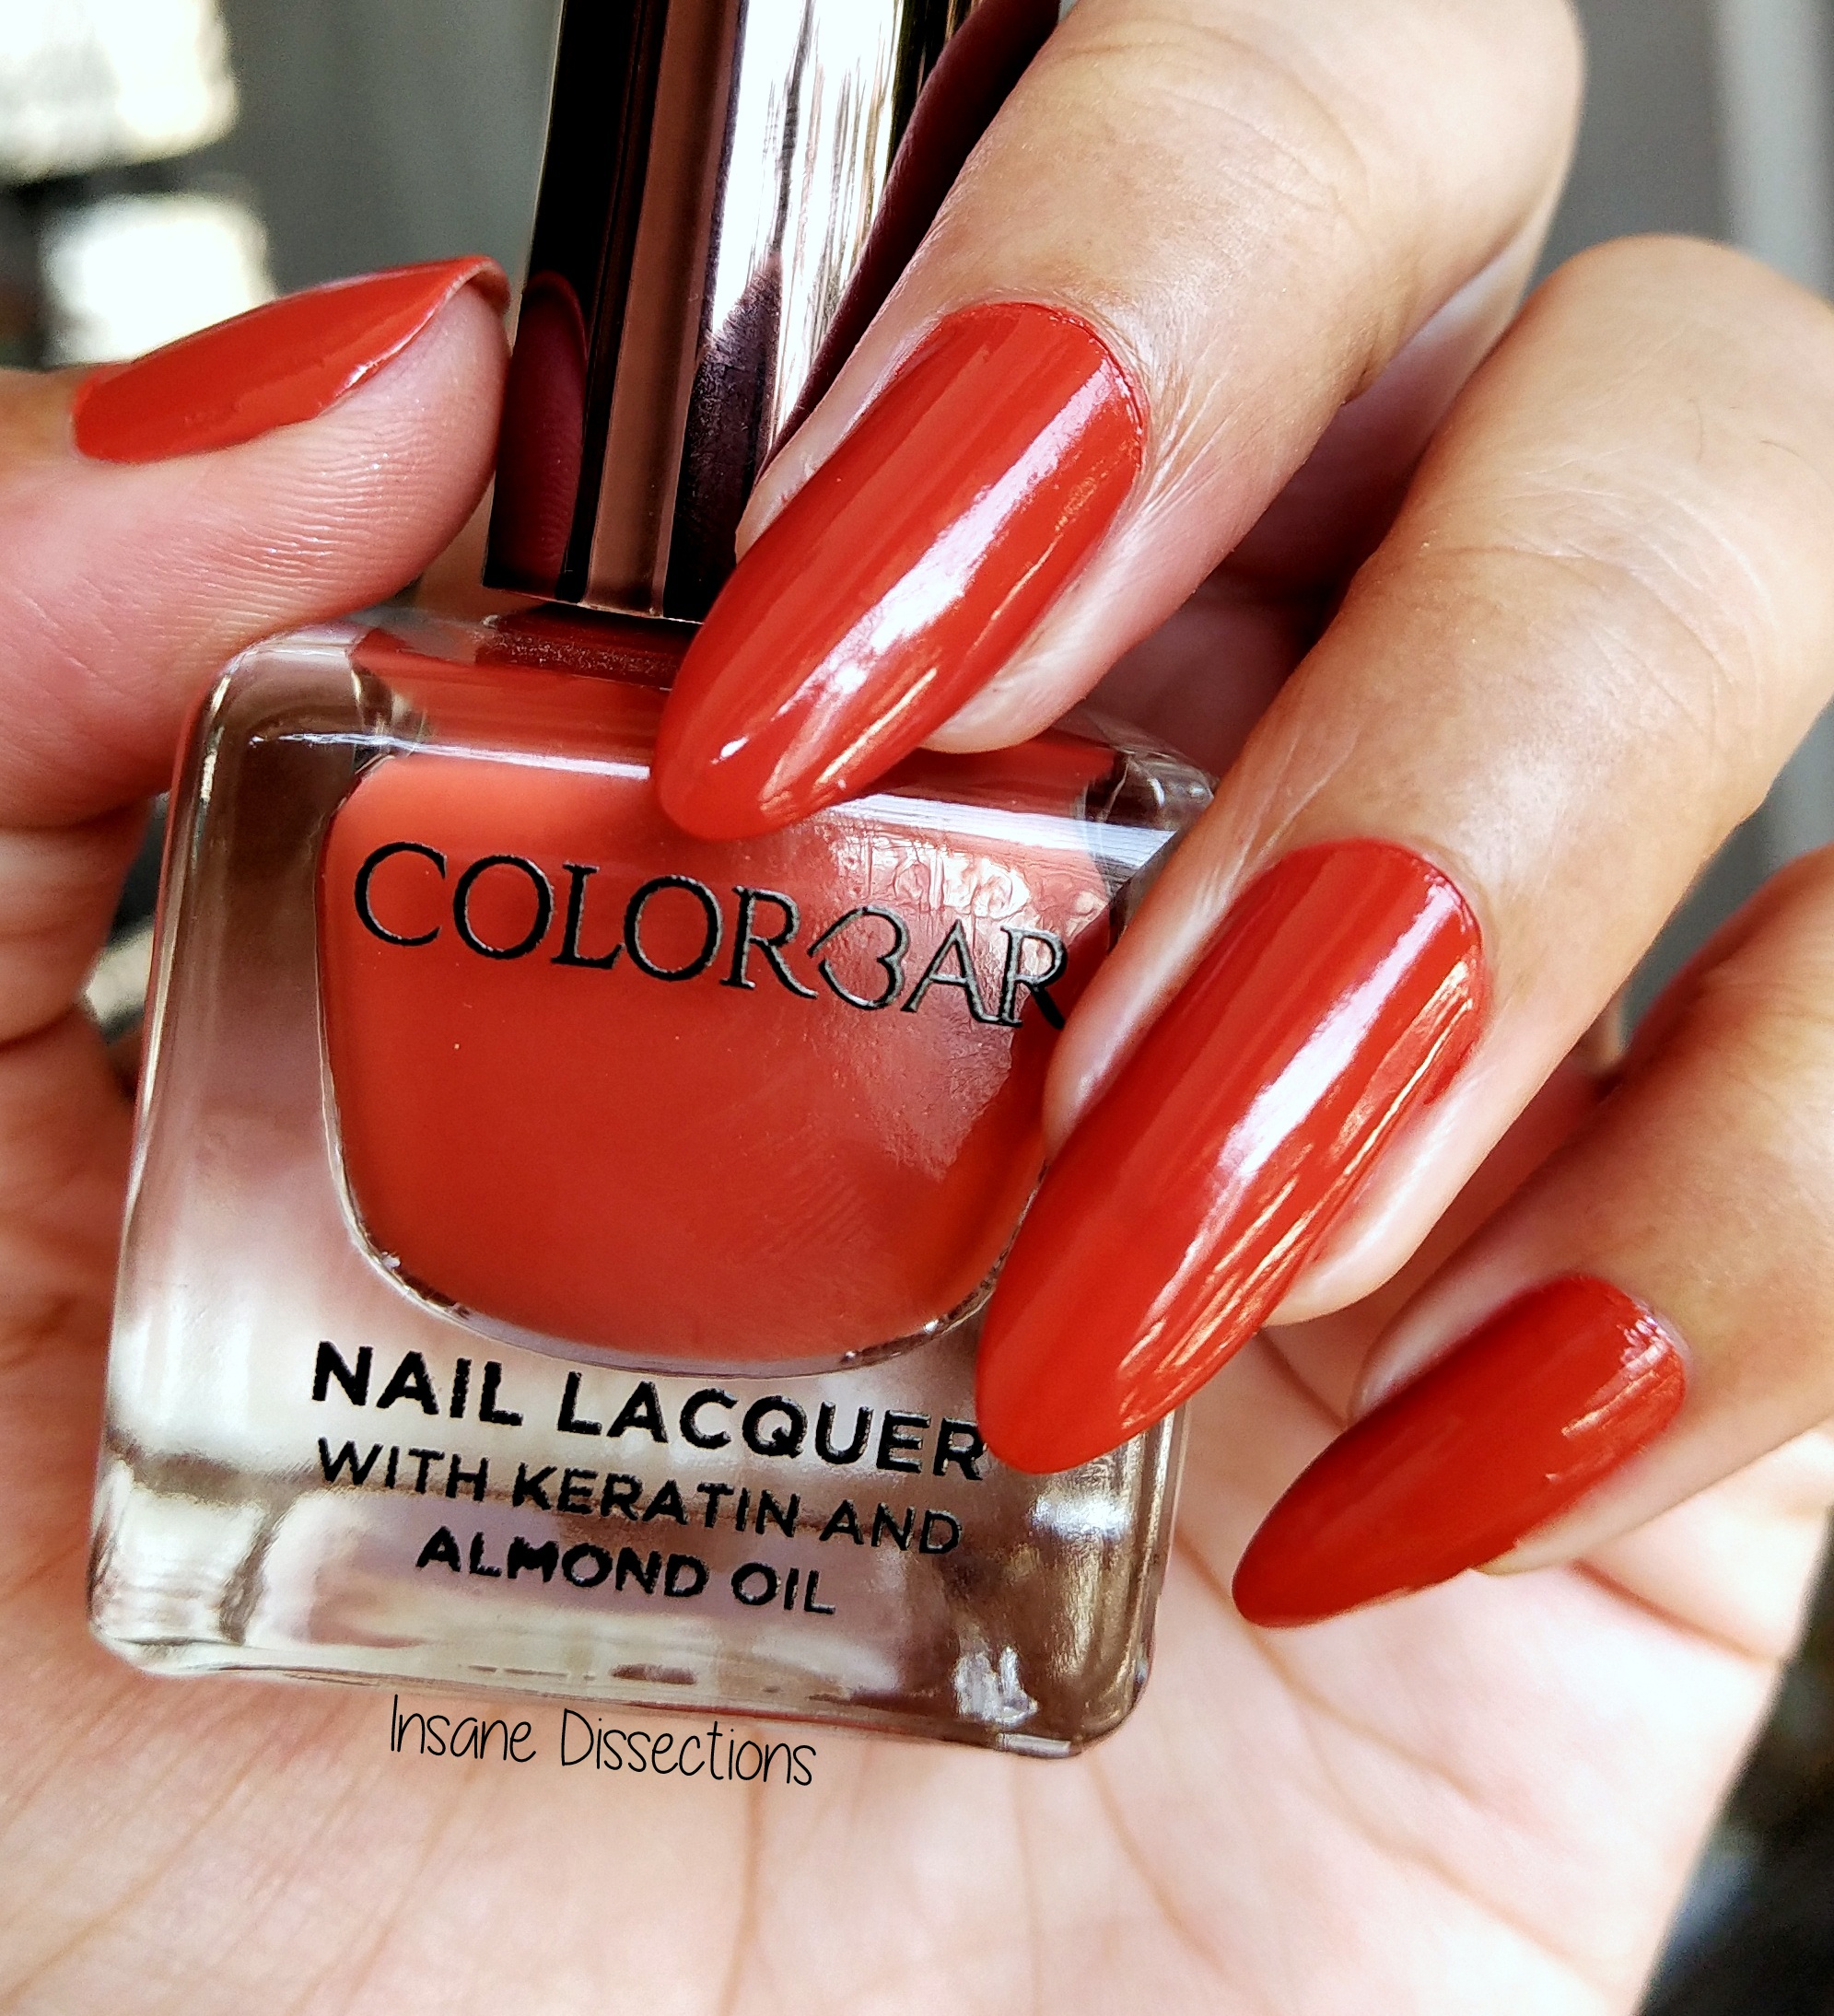 Stunning Colorbar Nail Polishes for a Glamorous Look